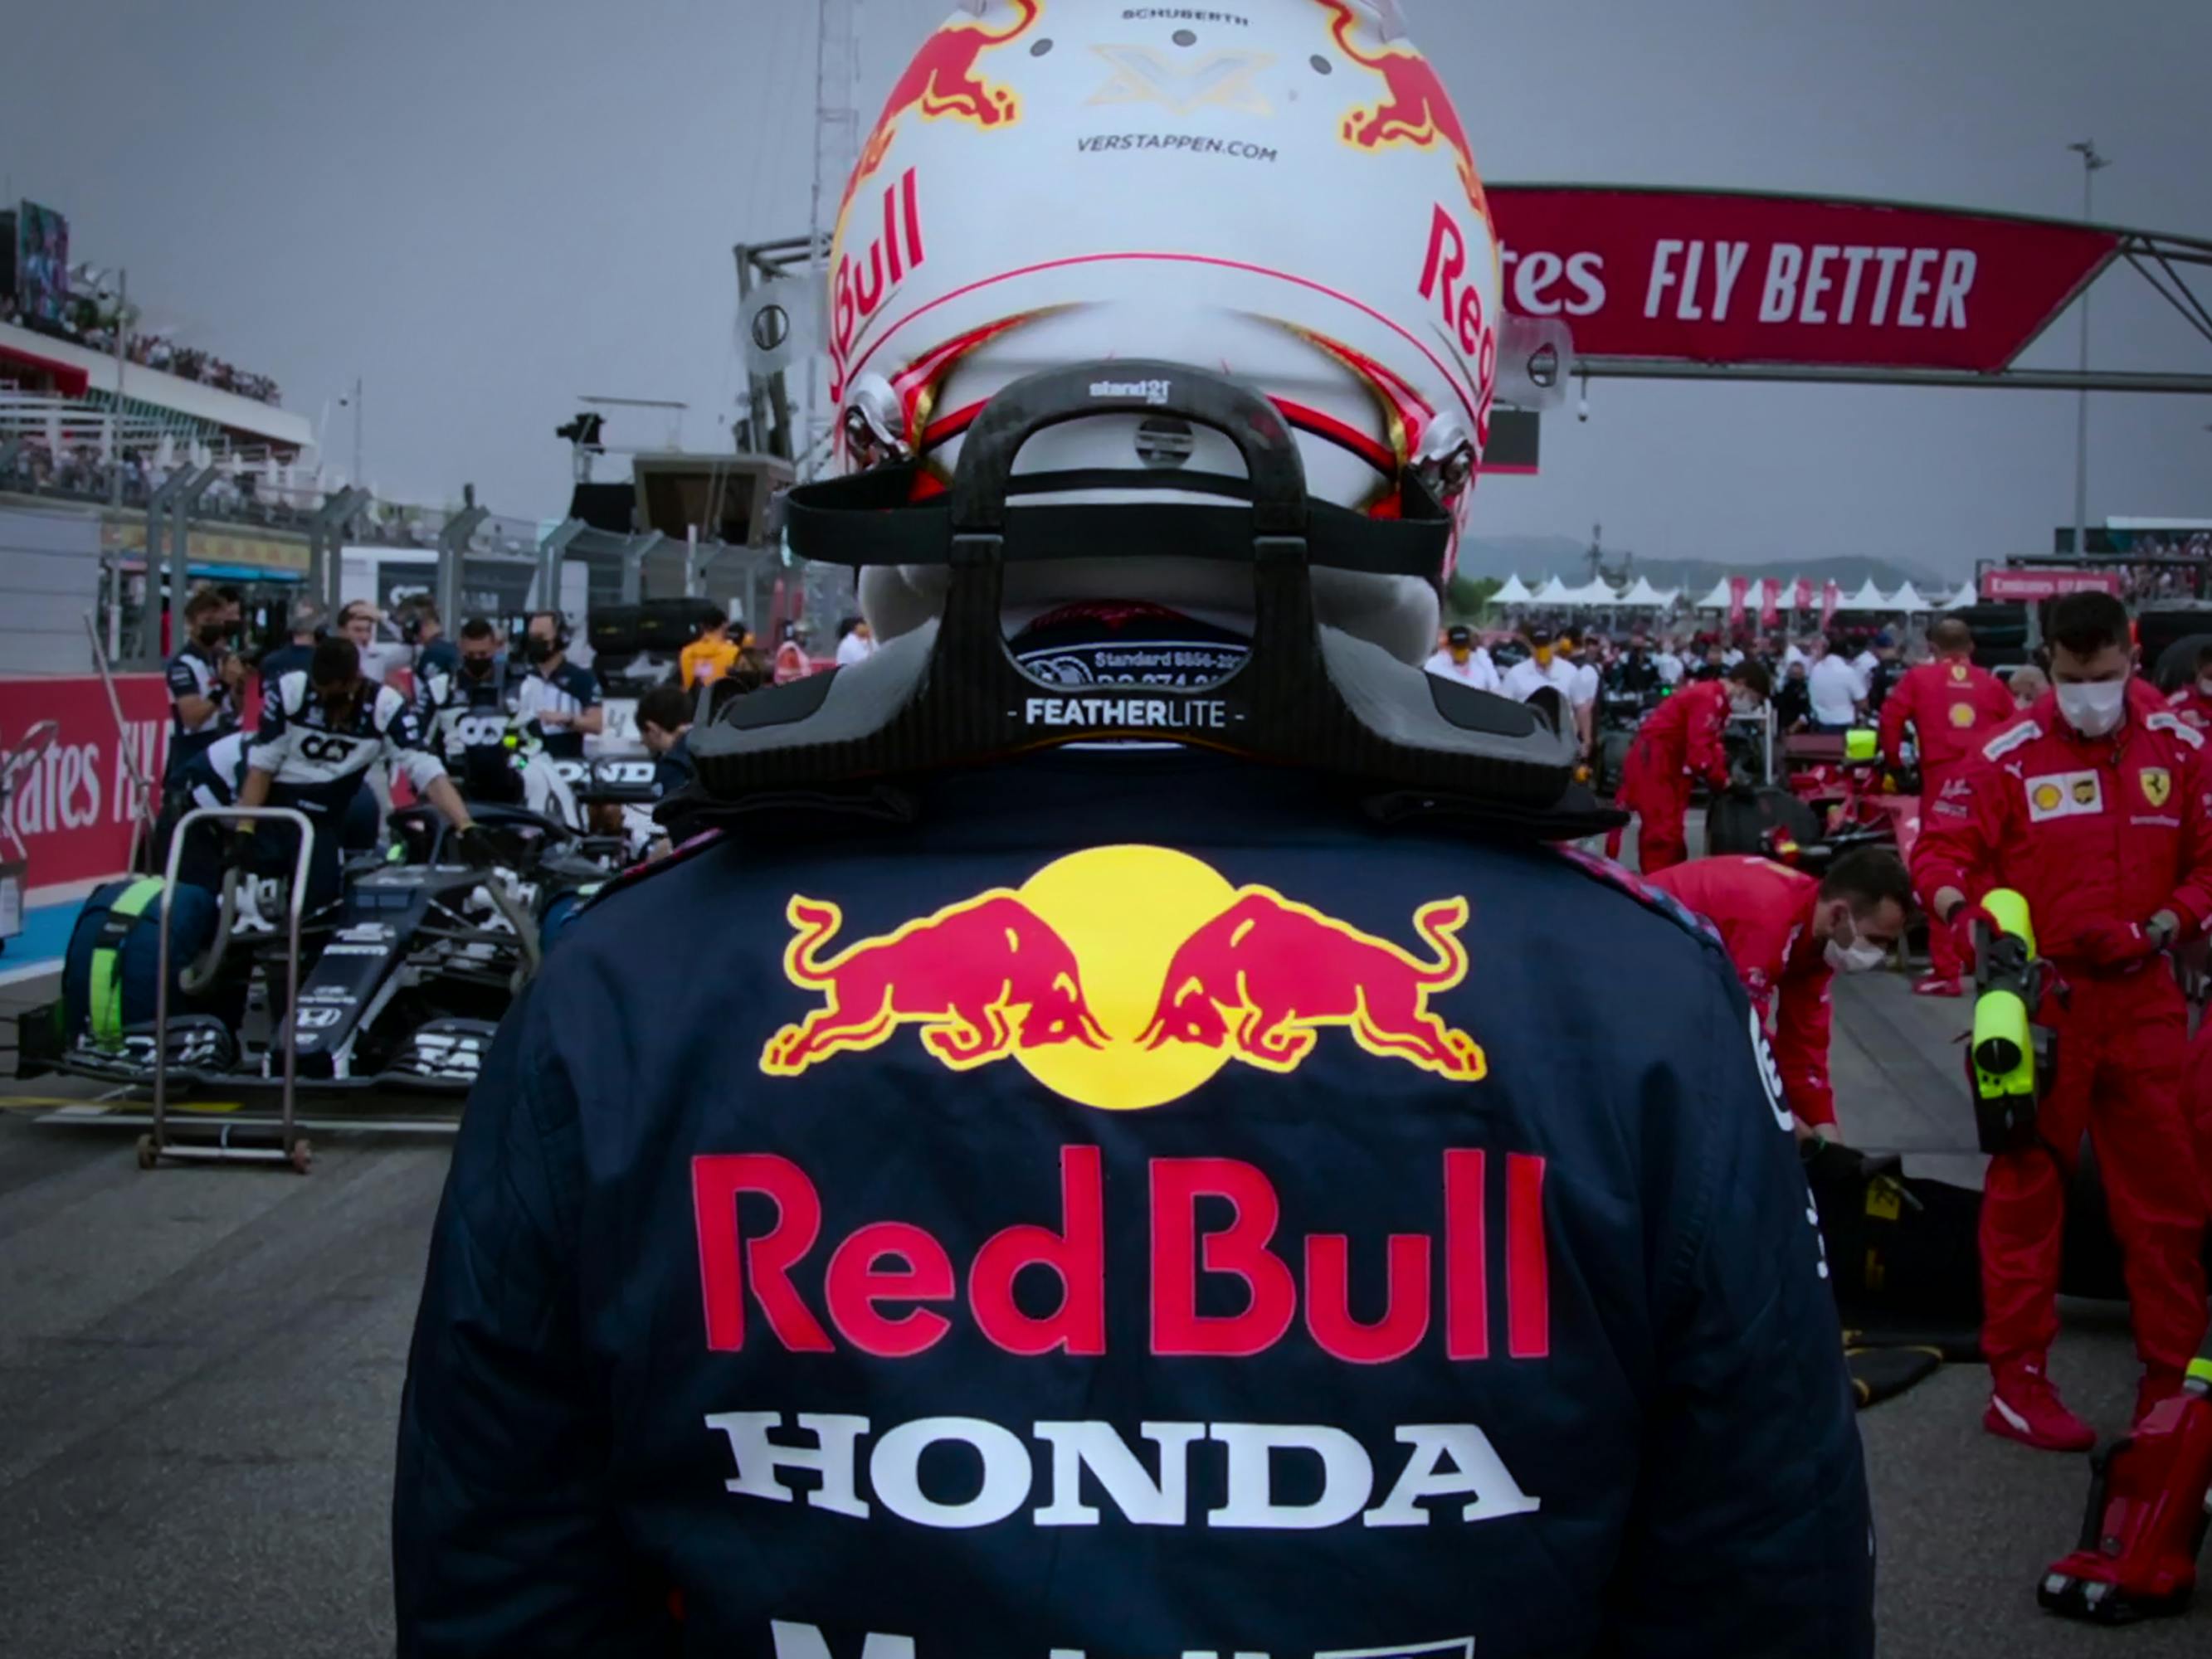 Max Verstappen wears his red bull uniform and approaches the track.